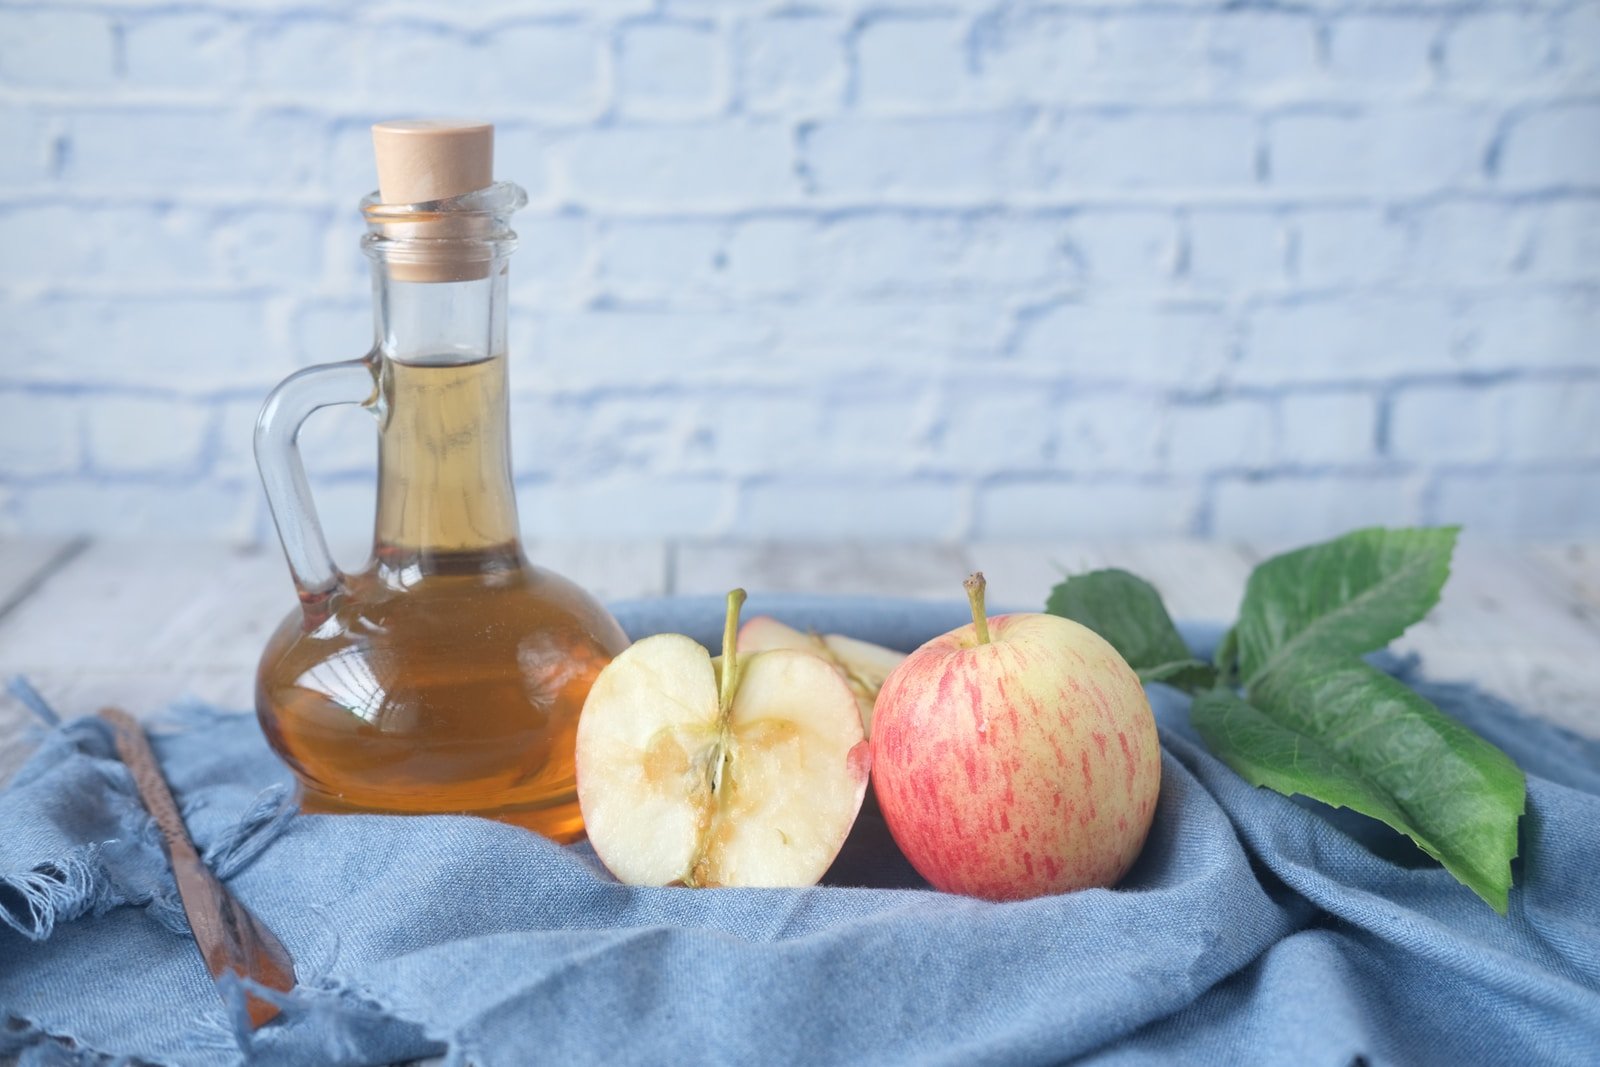 6 Plus Ways To Discover the Amazing Benefits of Apple Cider Vinegar